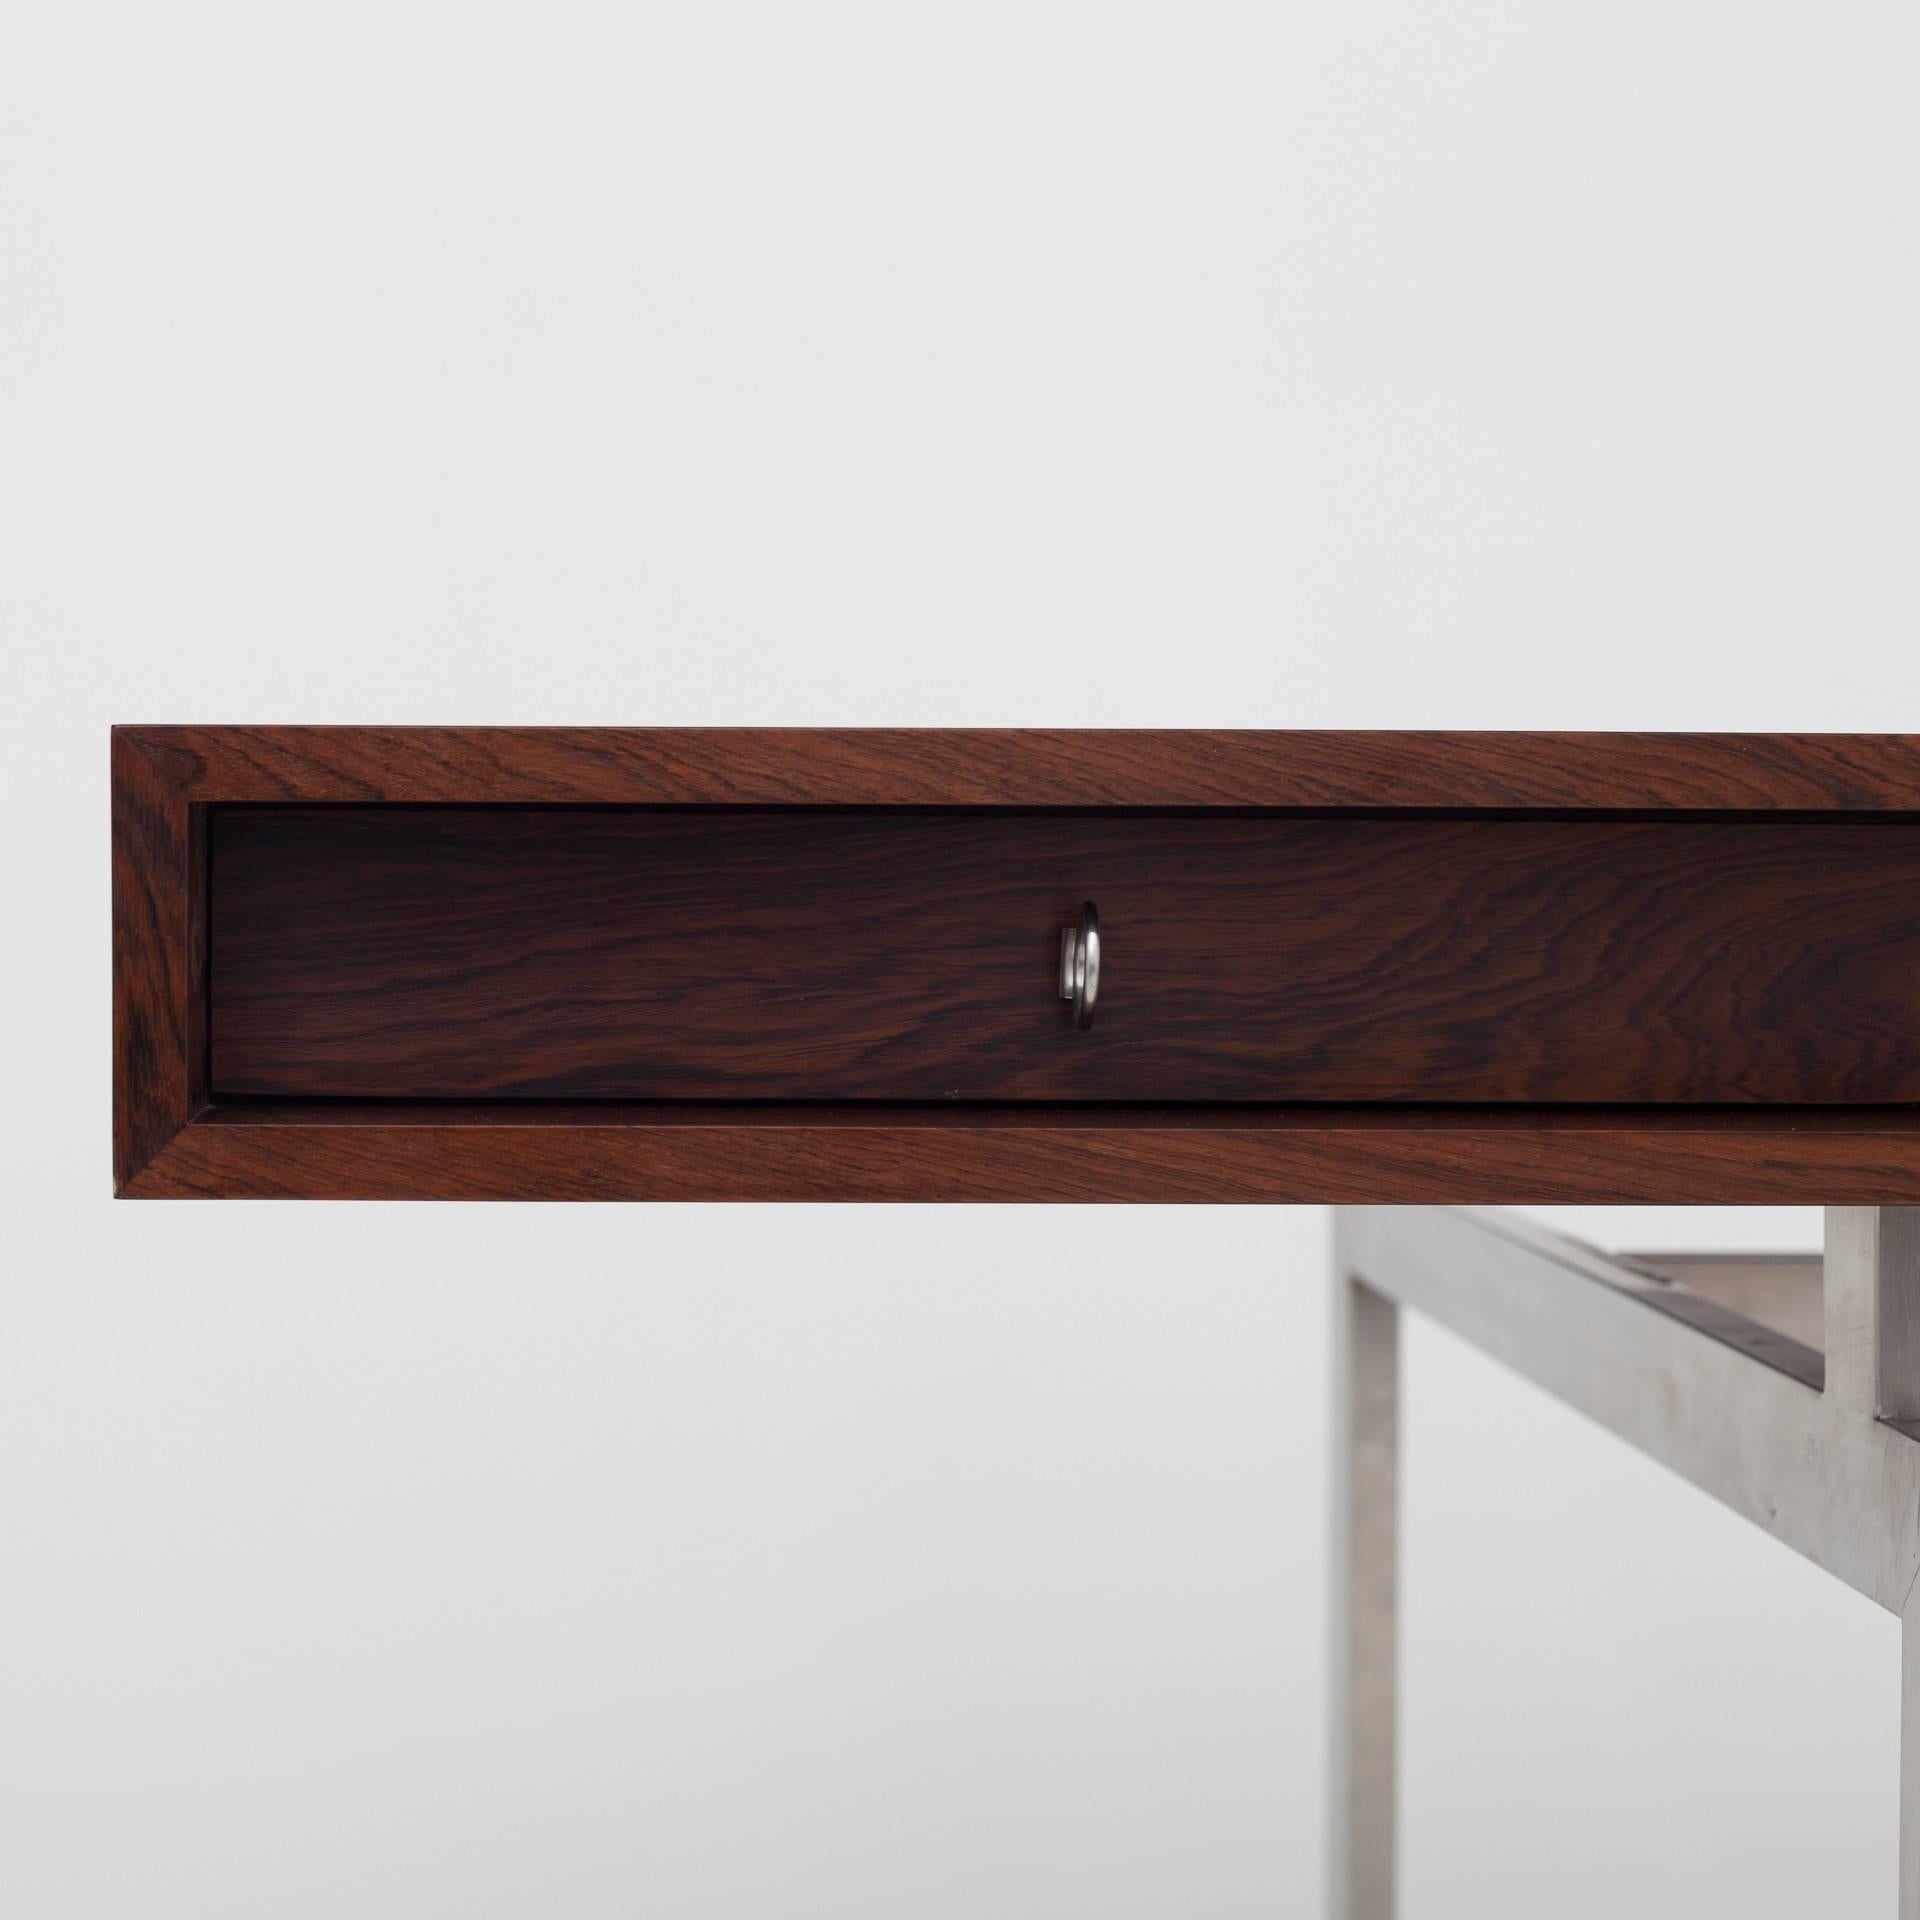 Desk in rosewood on steel frame with central locking. Reissued edition by Hothouse Design, around 15 pieces made in 2007.